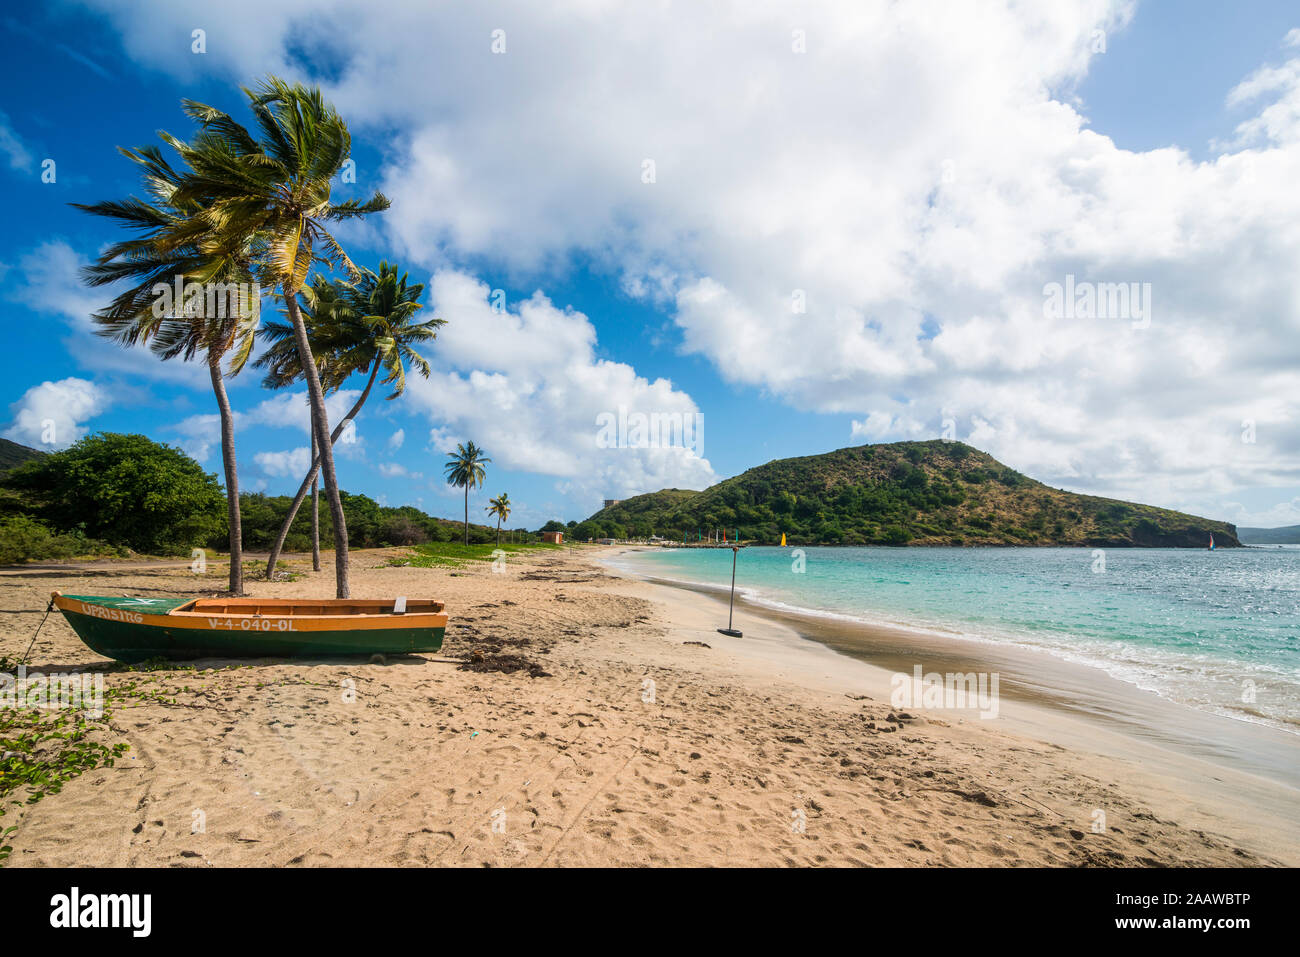 Idyllic view of Cockleshell bay, St. Kitts and Nevis, Caribbean Stock Photo